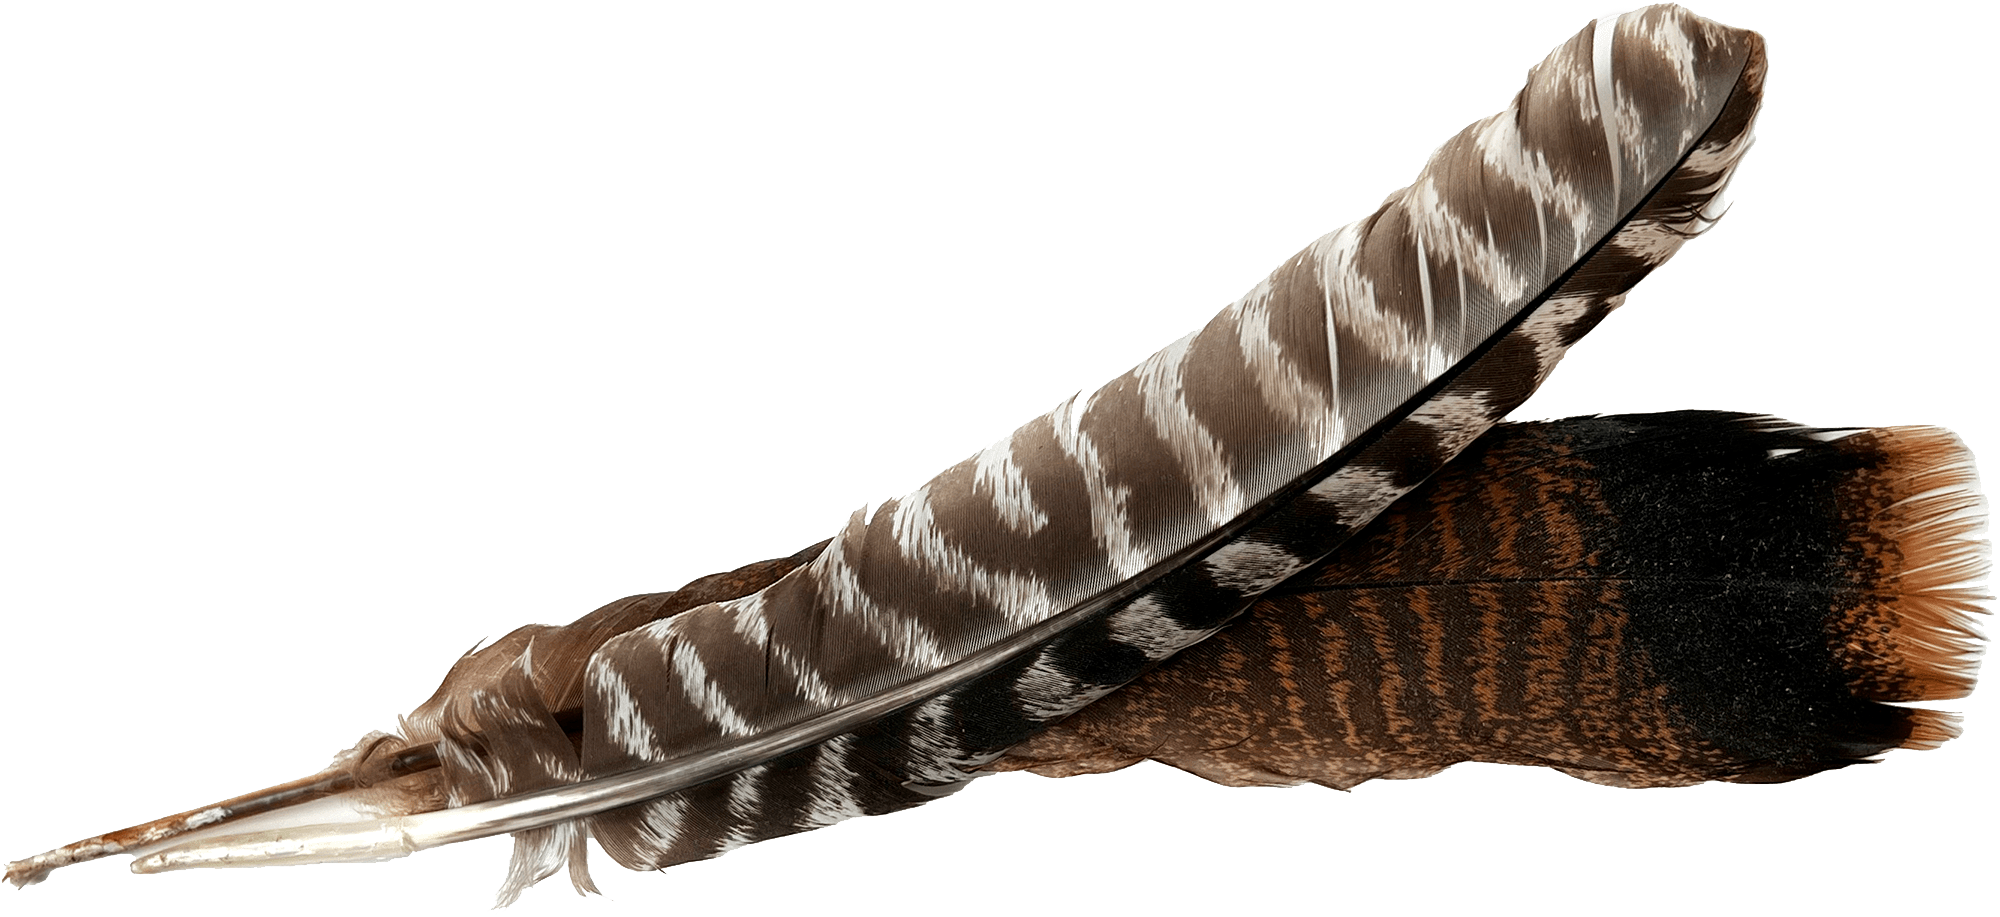 A photograph of Wild Turkey feathers with no background